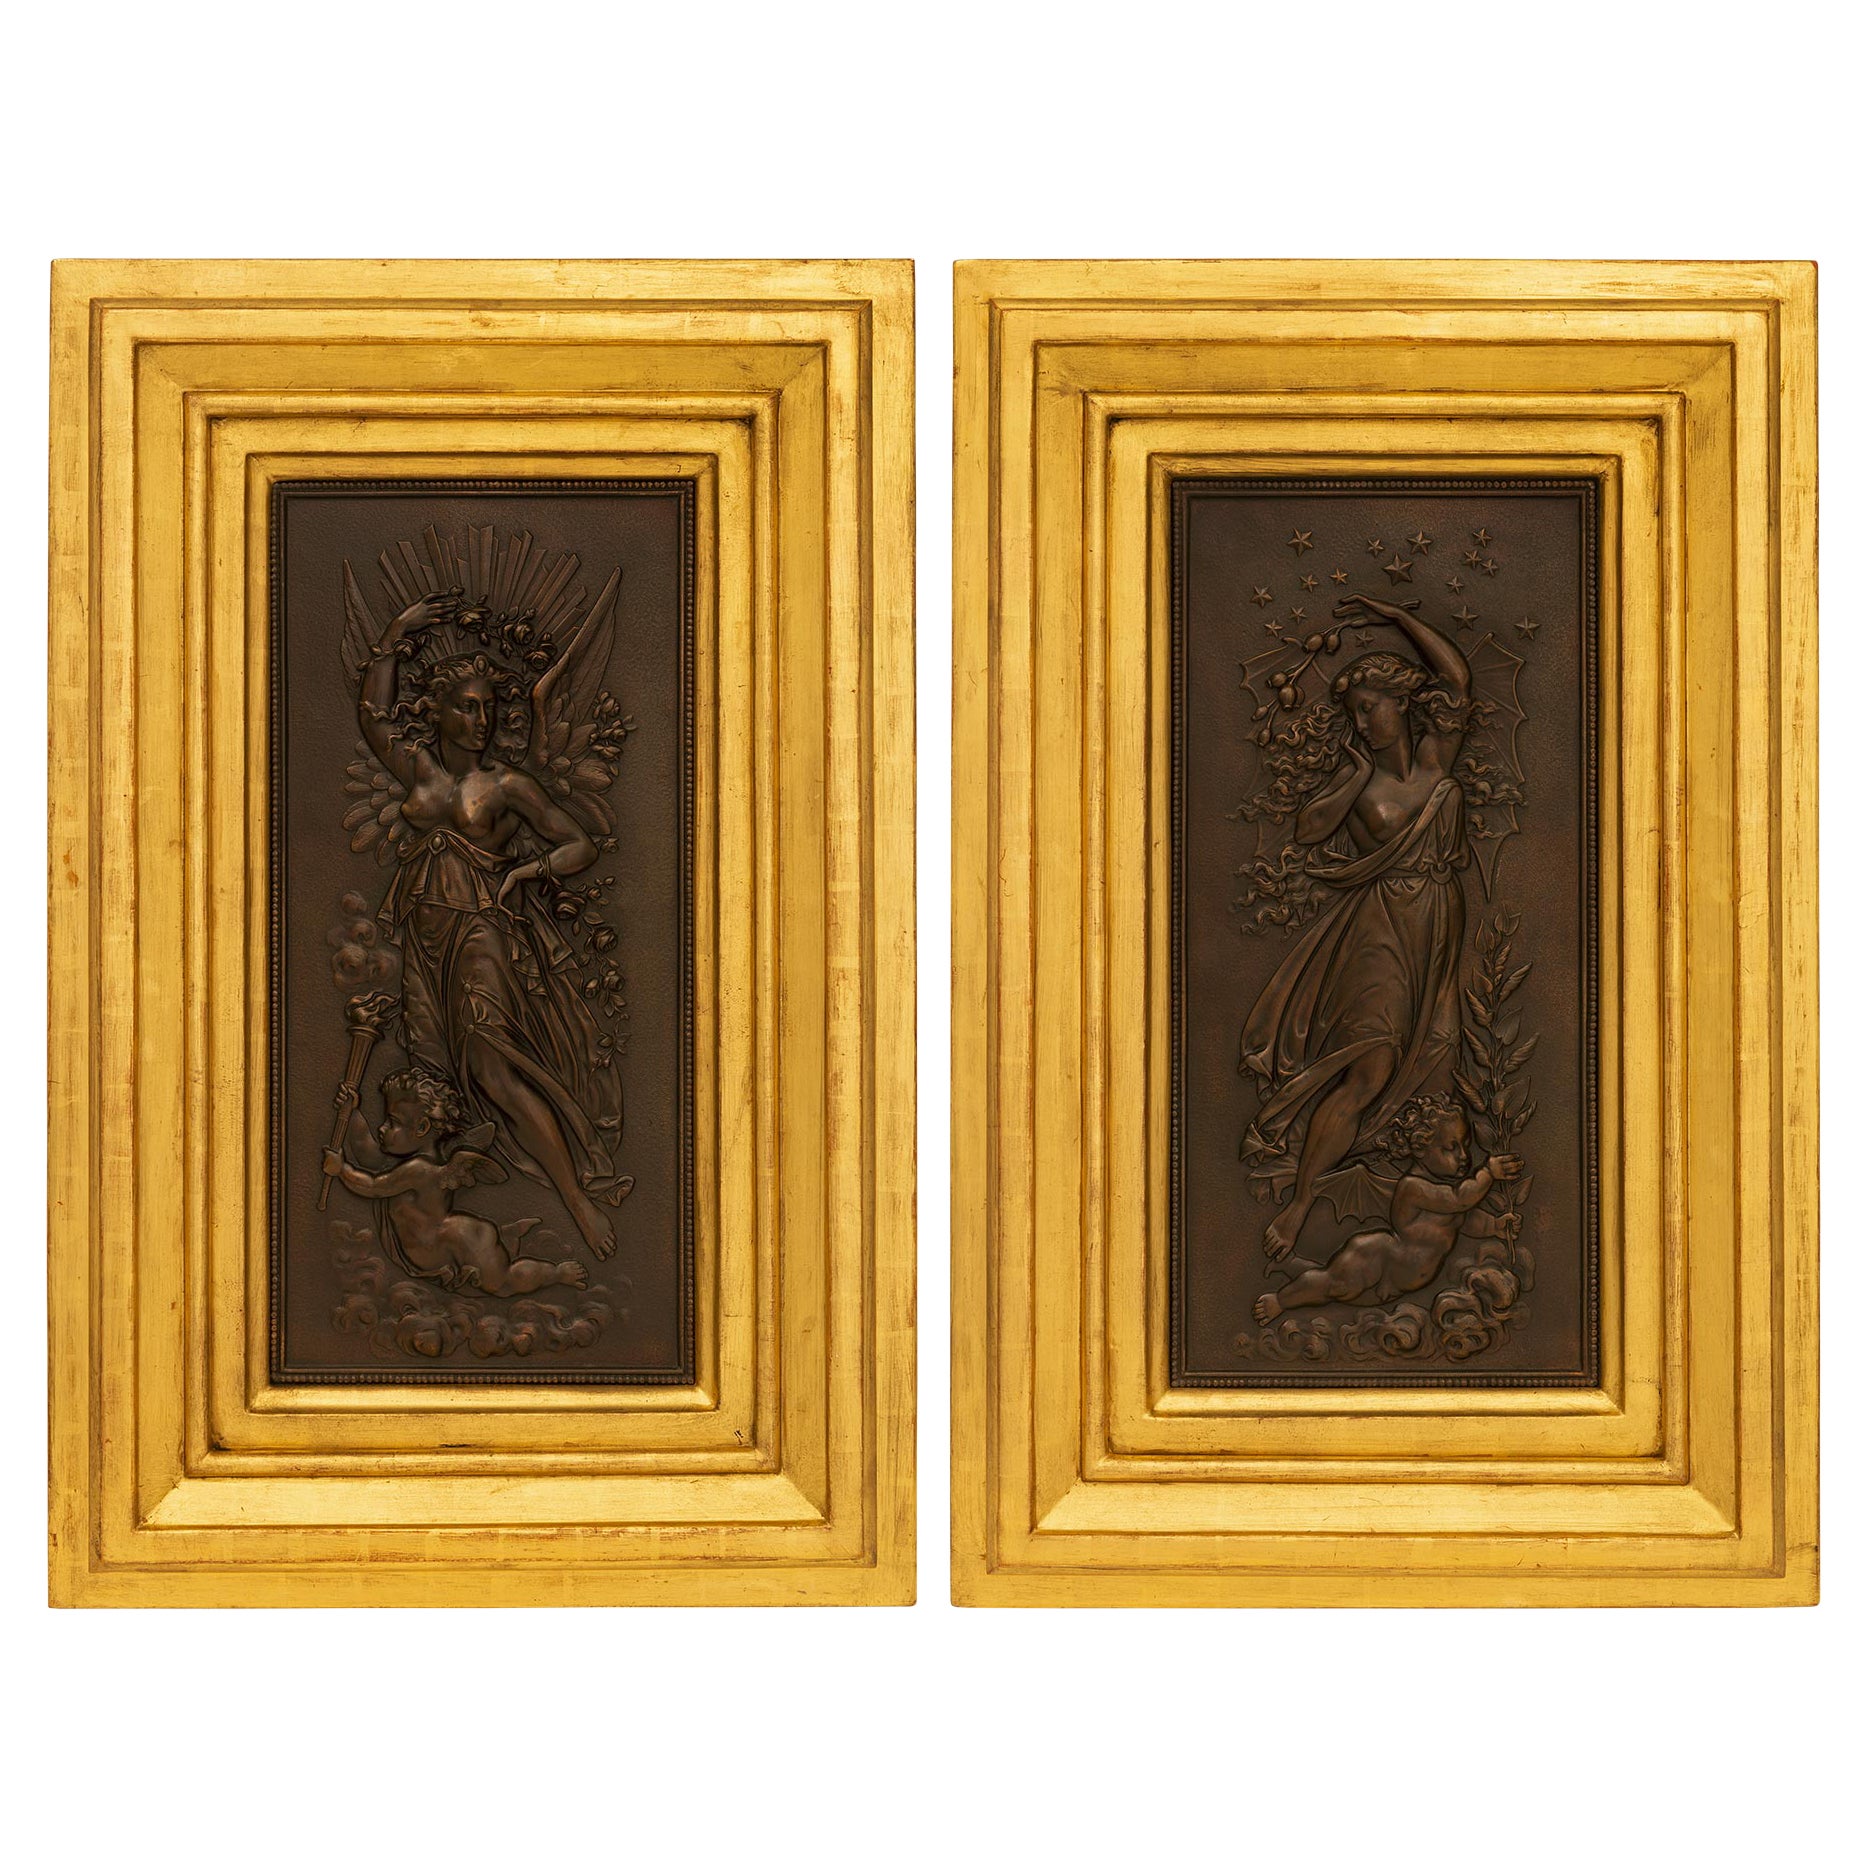 Pair of French 19th Century Belle Époque Period Bronze & Giltwood Wall Plaques